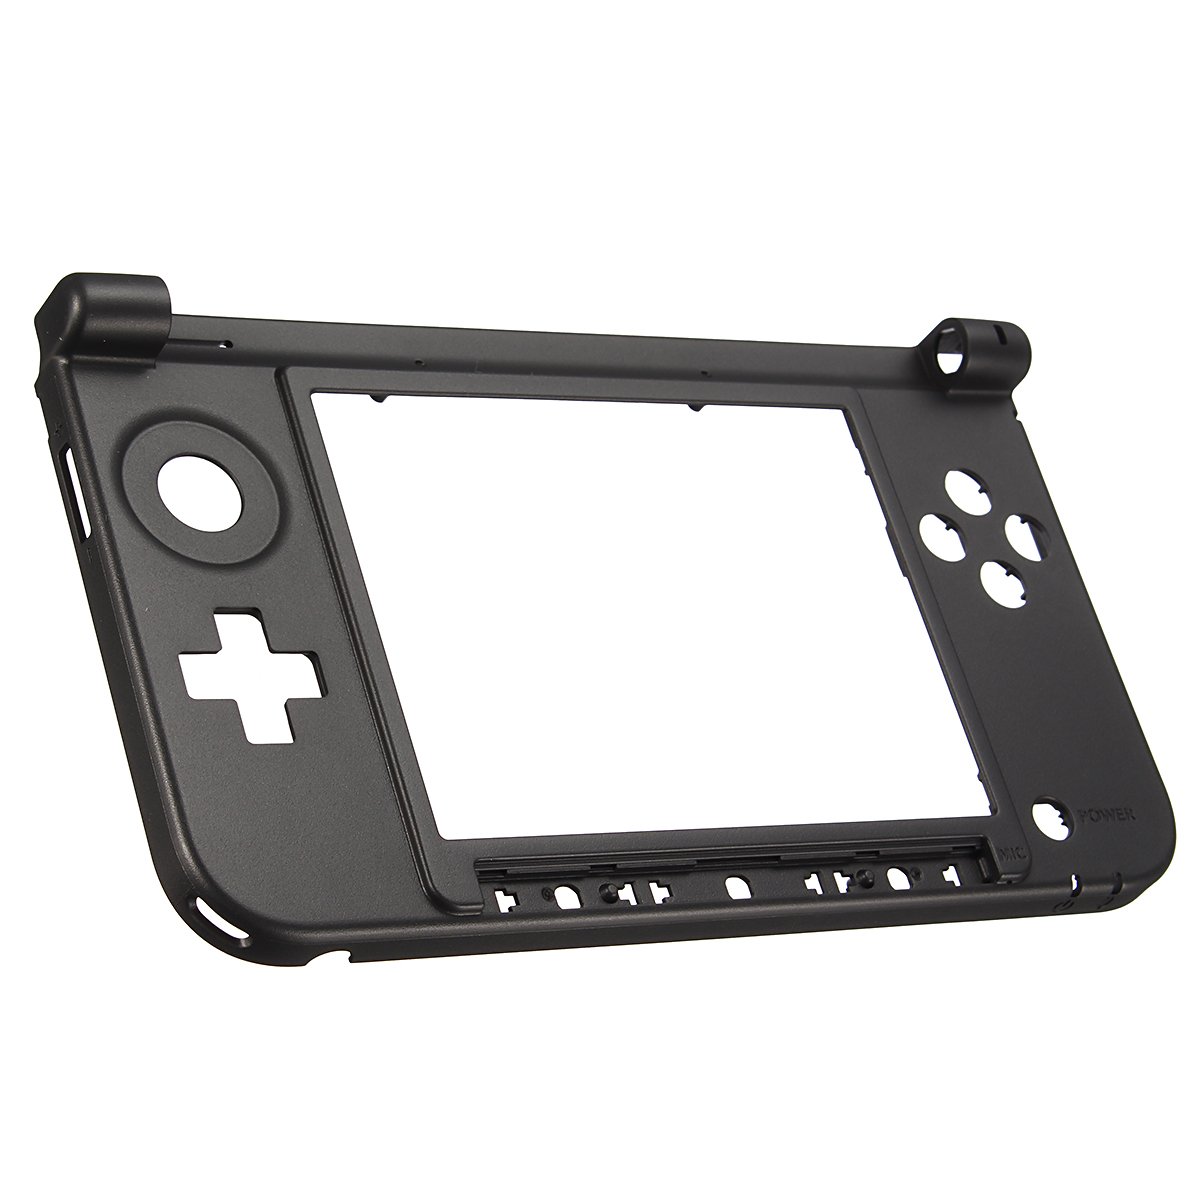 Replacement Bottom Middle Frame Housing Shell Cover Case for Nintendo 3DS XL 3DS LL Game Console 2